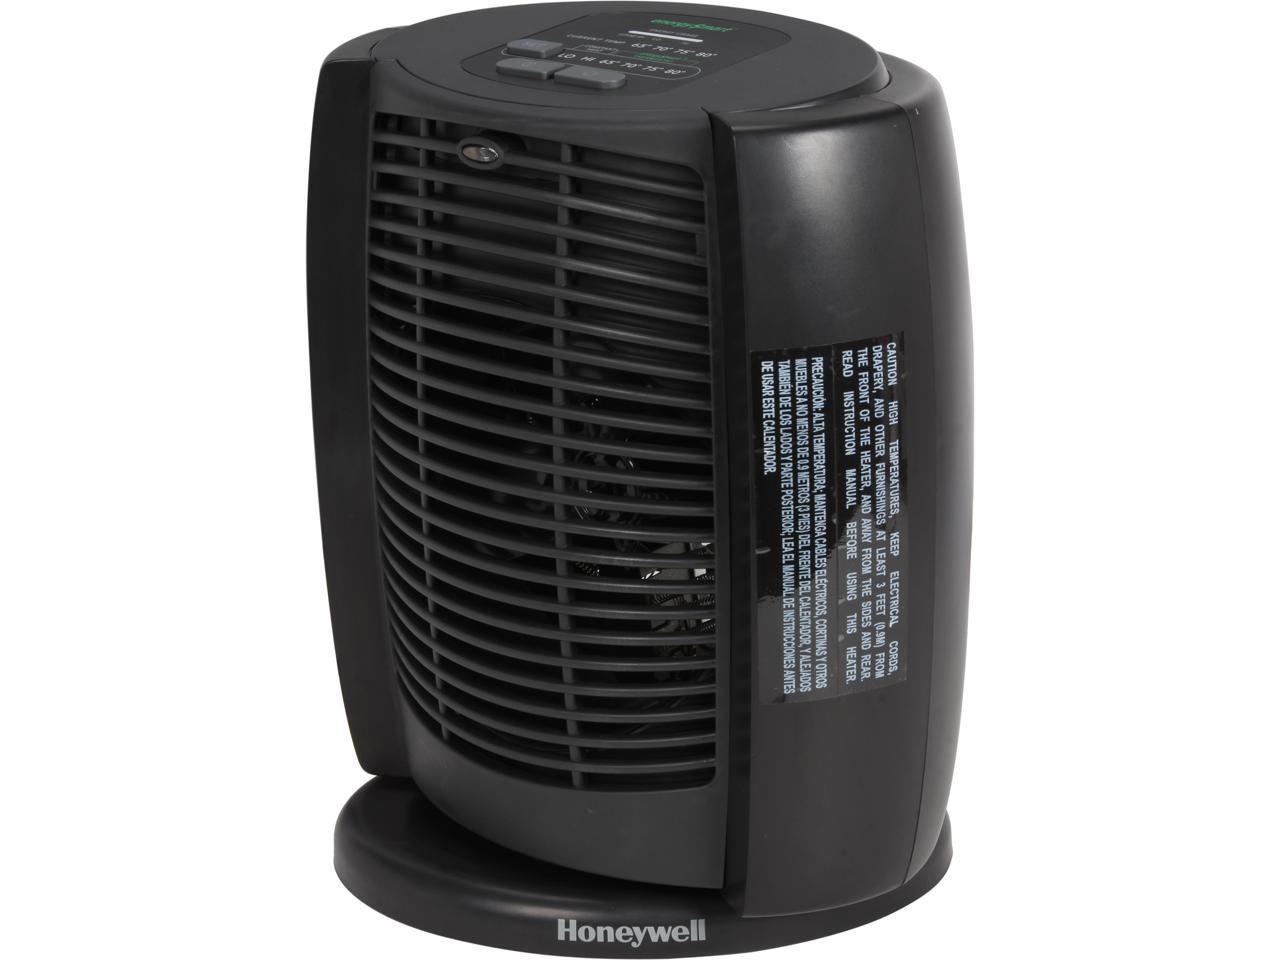 Honeywell Deluxe Energysmart Cool Touch Heater White